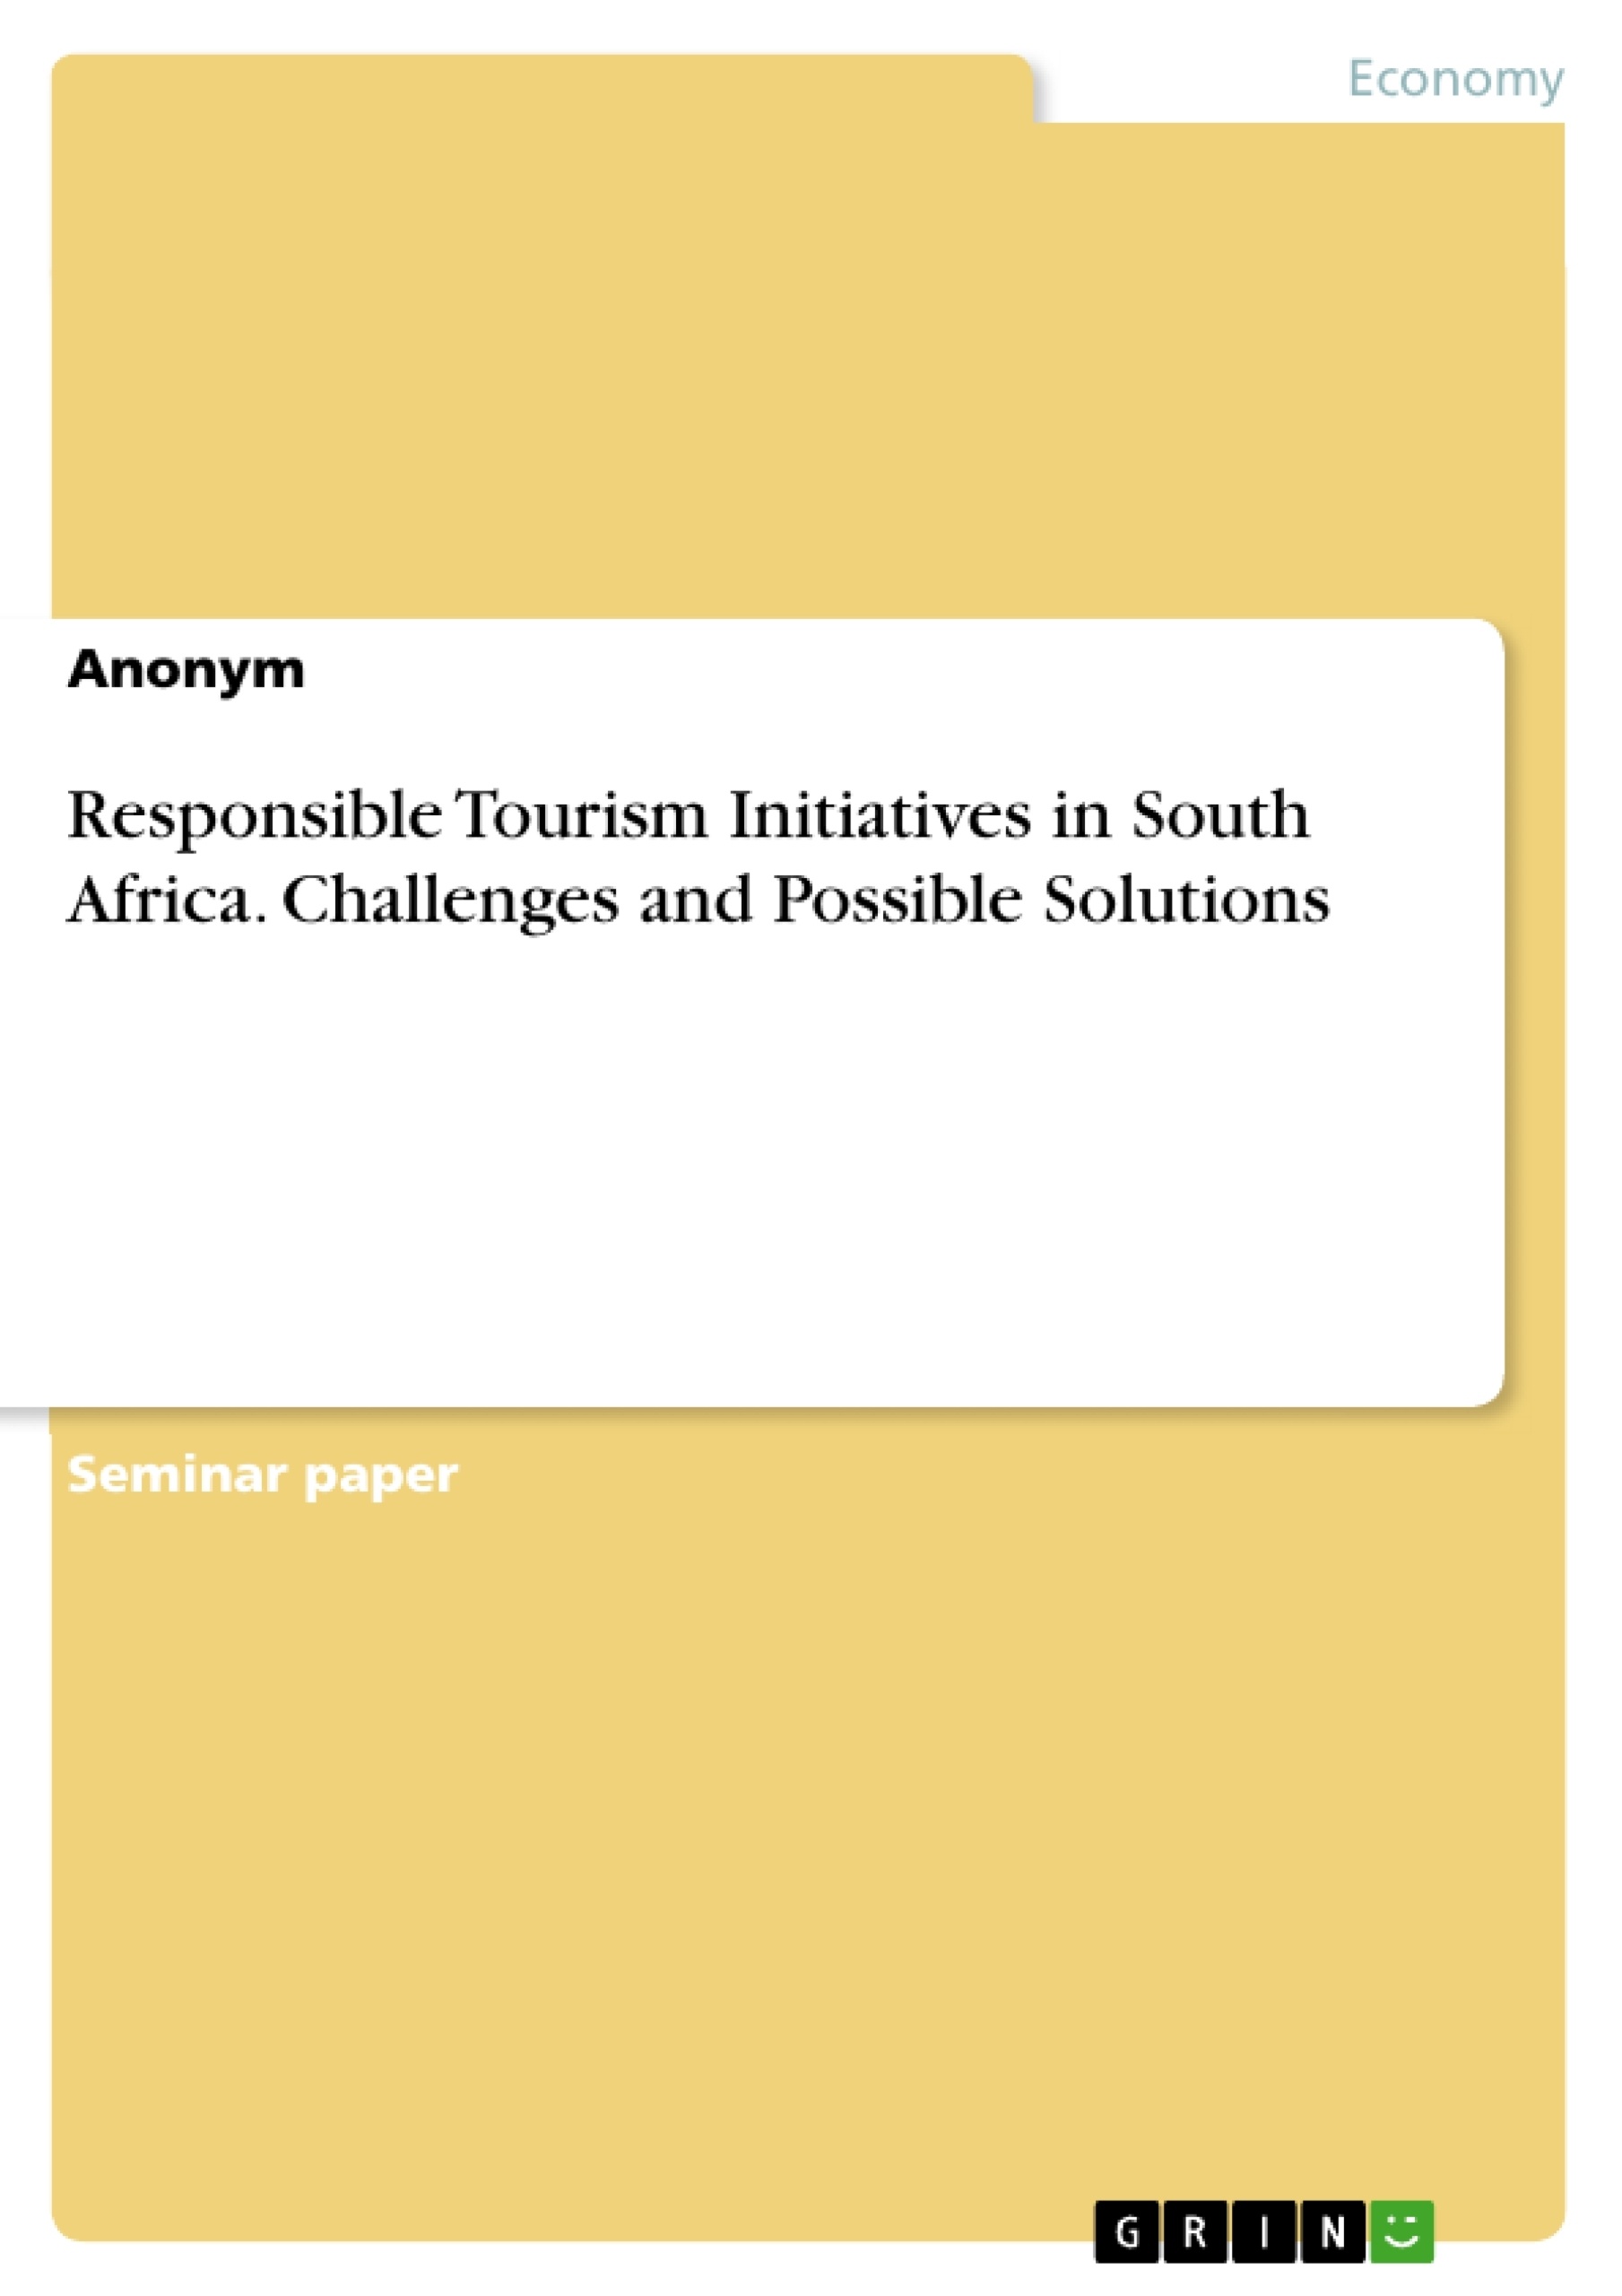 Title: Responsible Tourism Initiatives in South Africa. Challenges and Possible Solutions